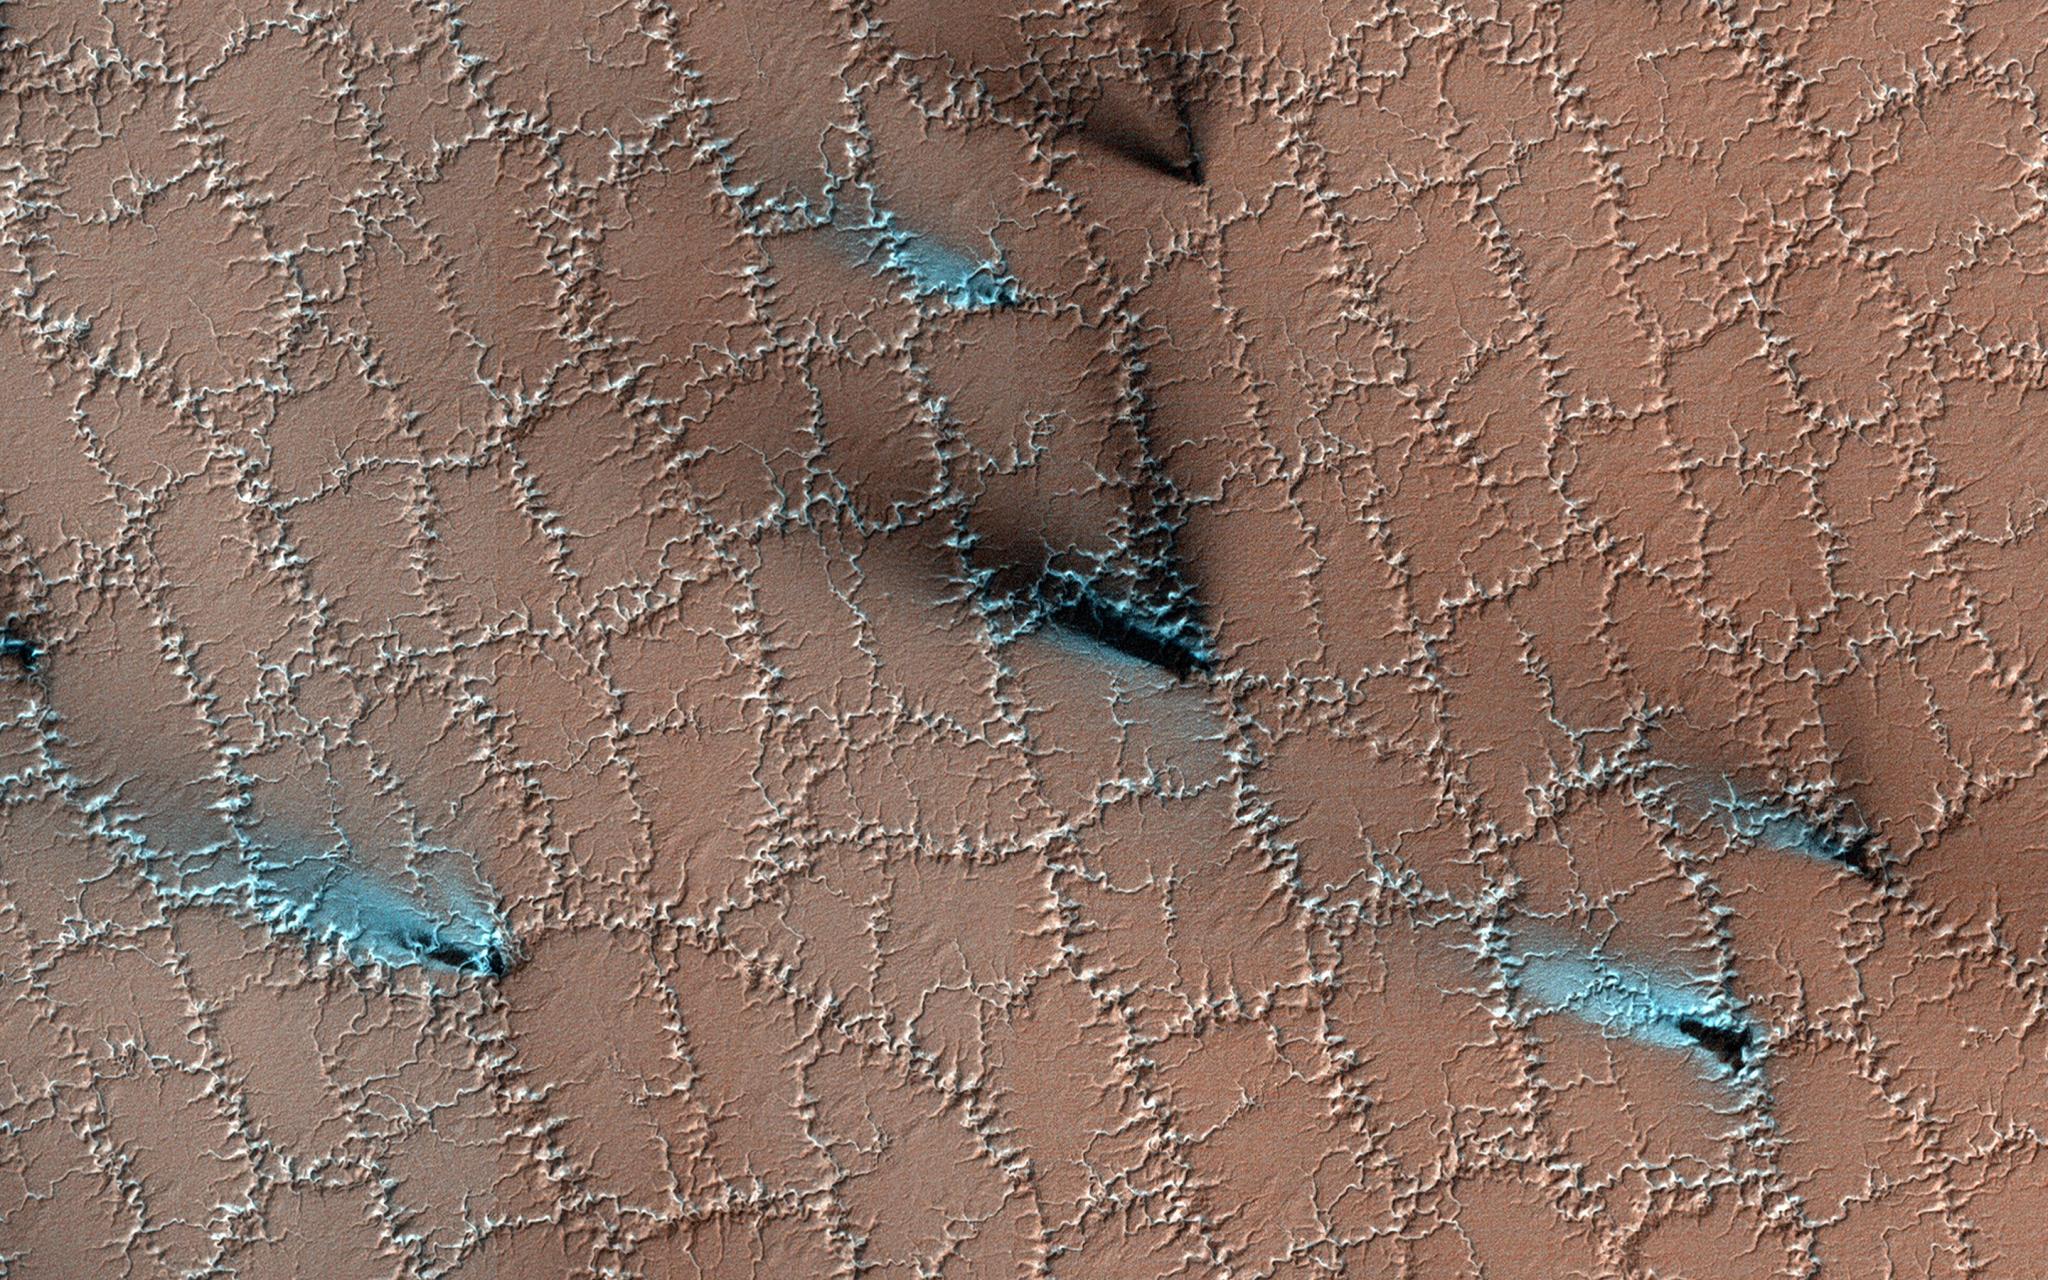 HiRISE captured this spring scene, when water ice frozen in the soil had split the ground into polygons.